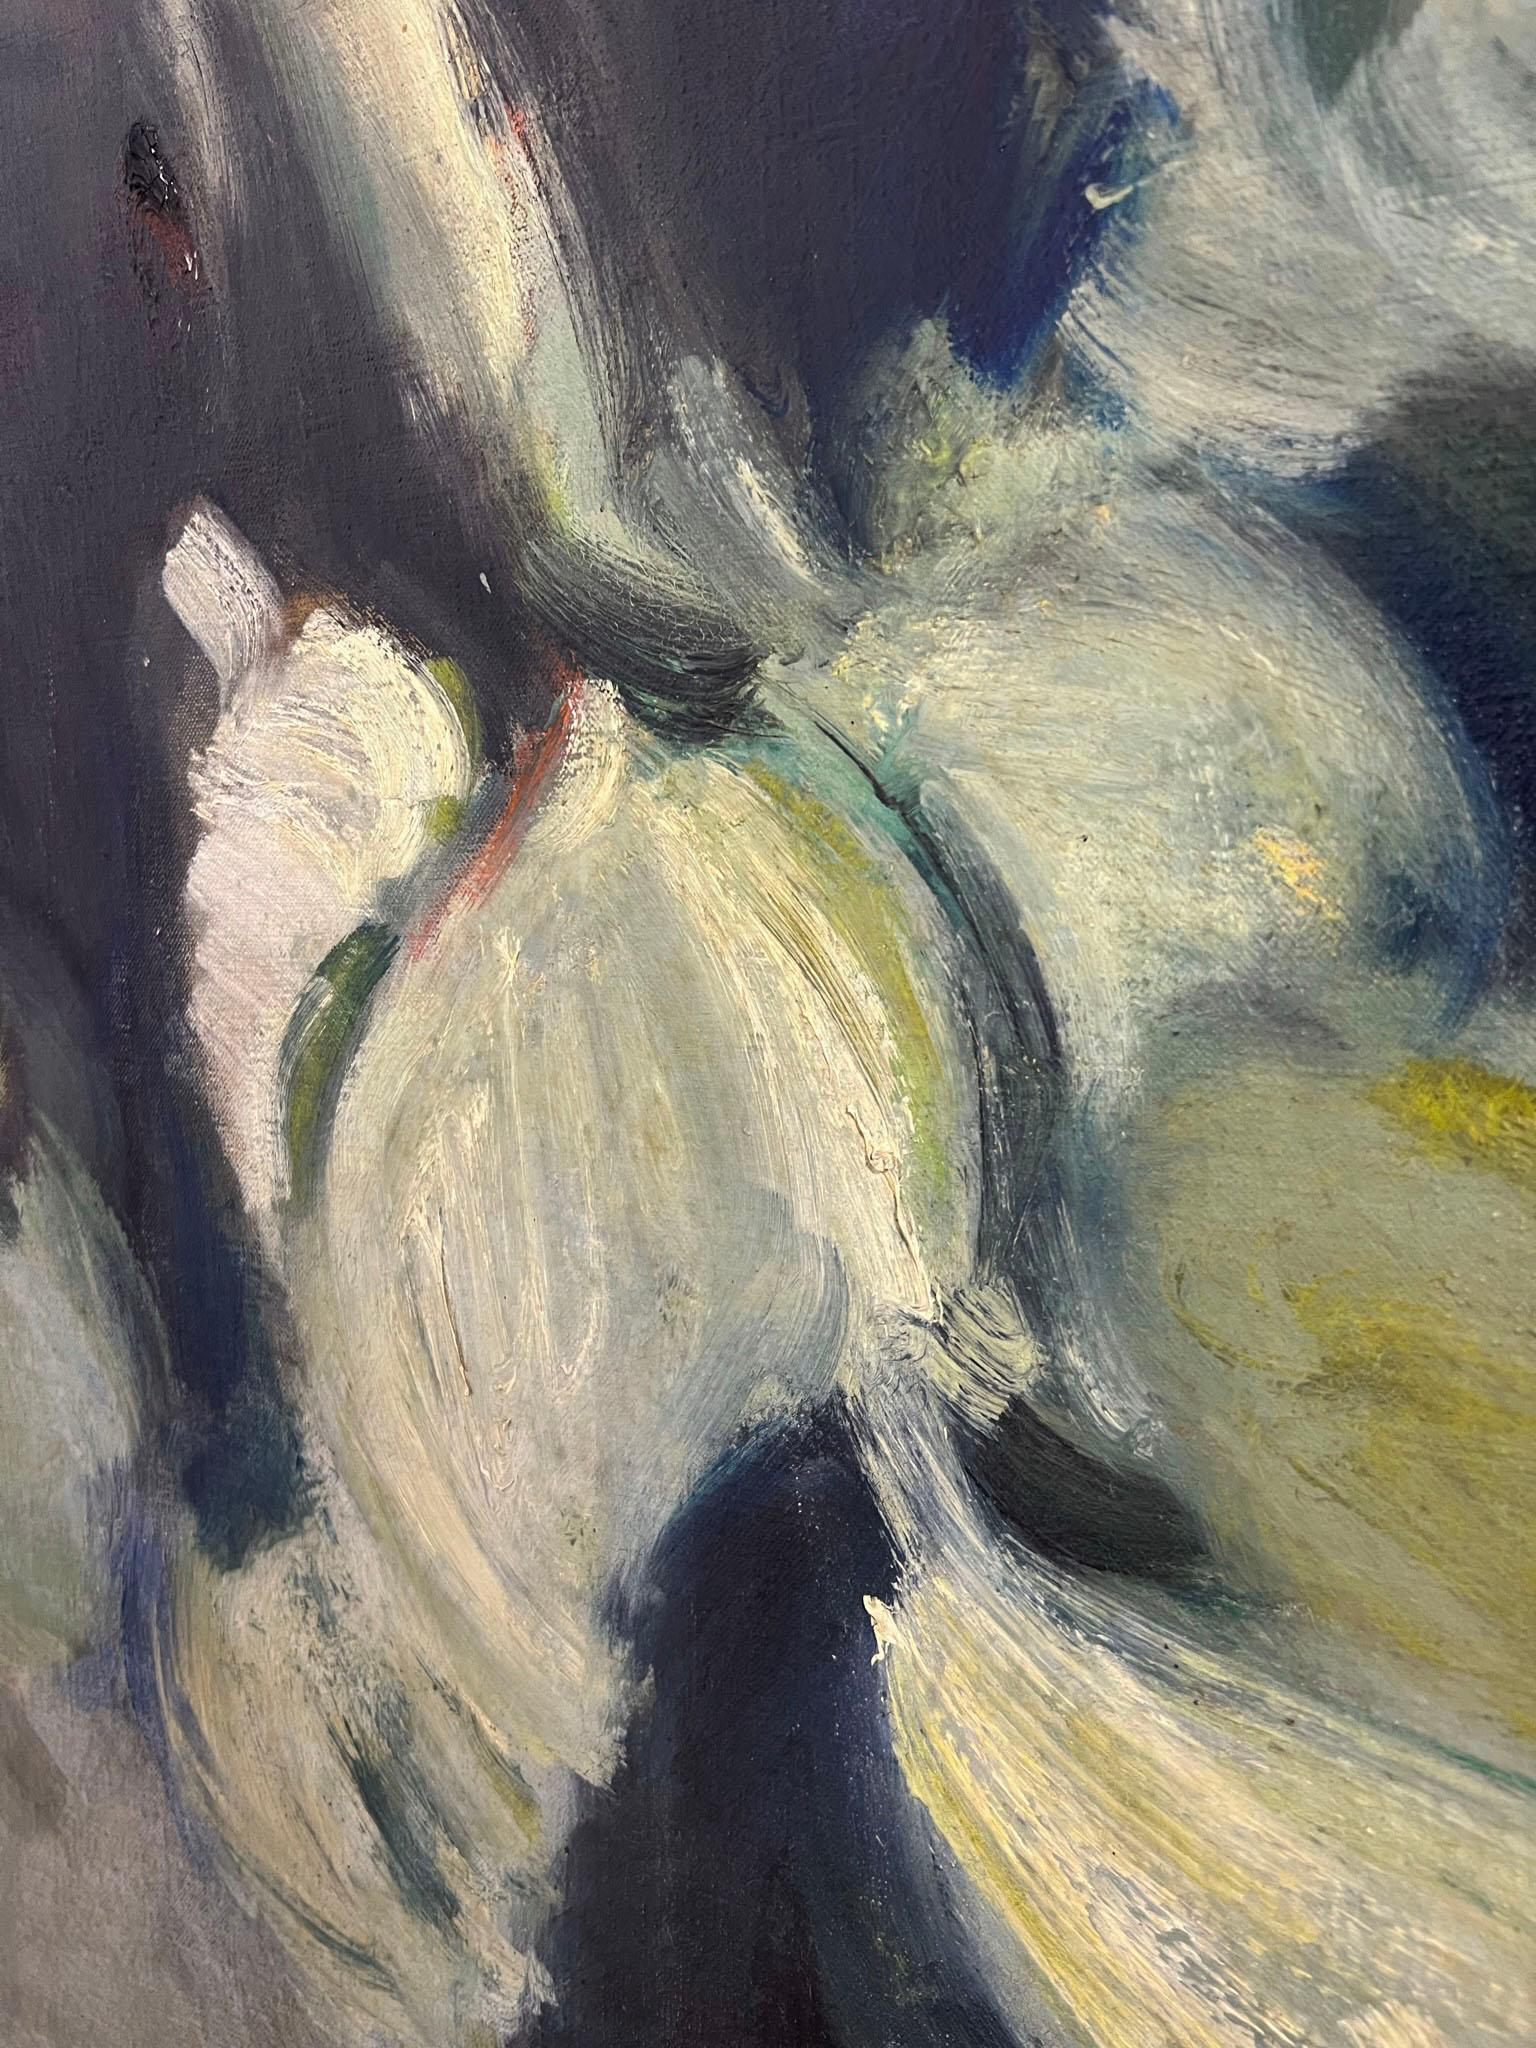 Abstract modernist oil on canvas, possibly an interior scene, signed McLaren, dated 1961. Notation on reverse indicates painting was 